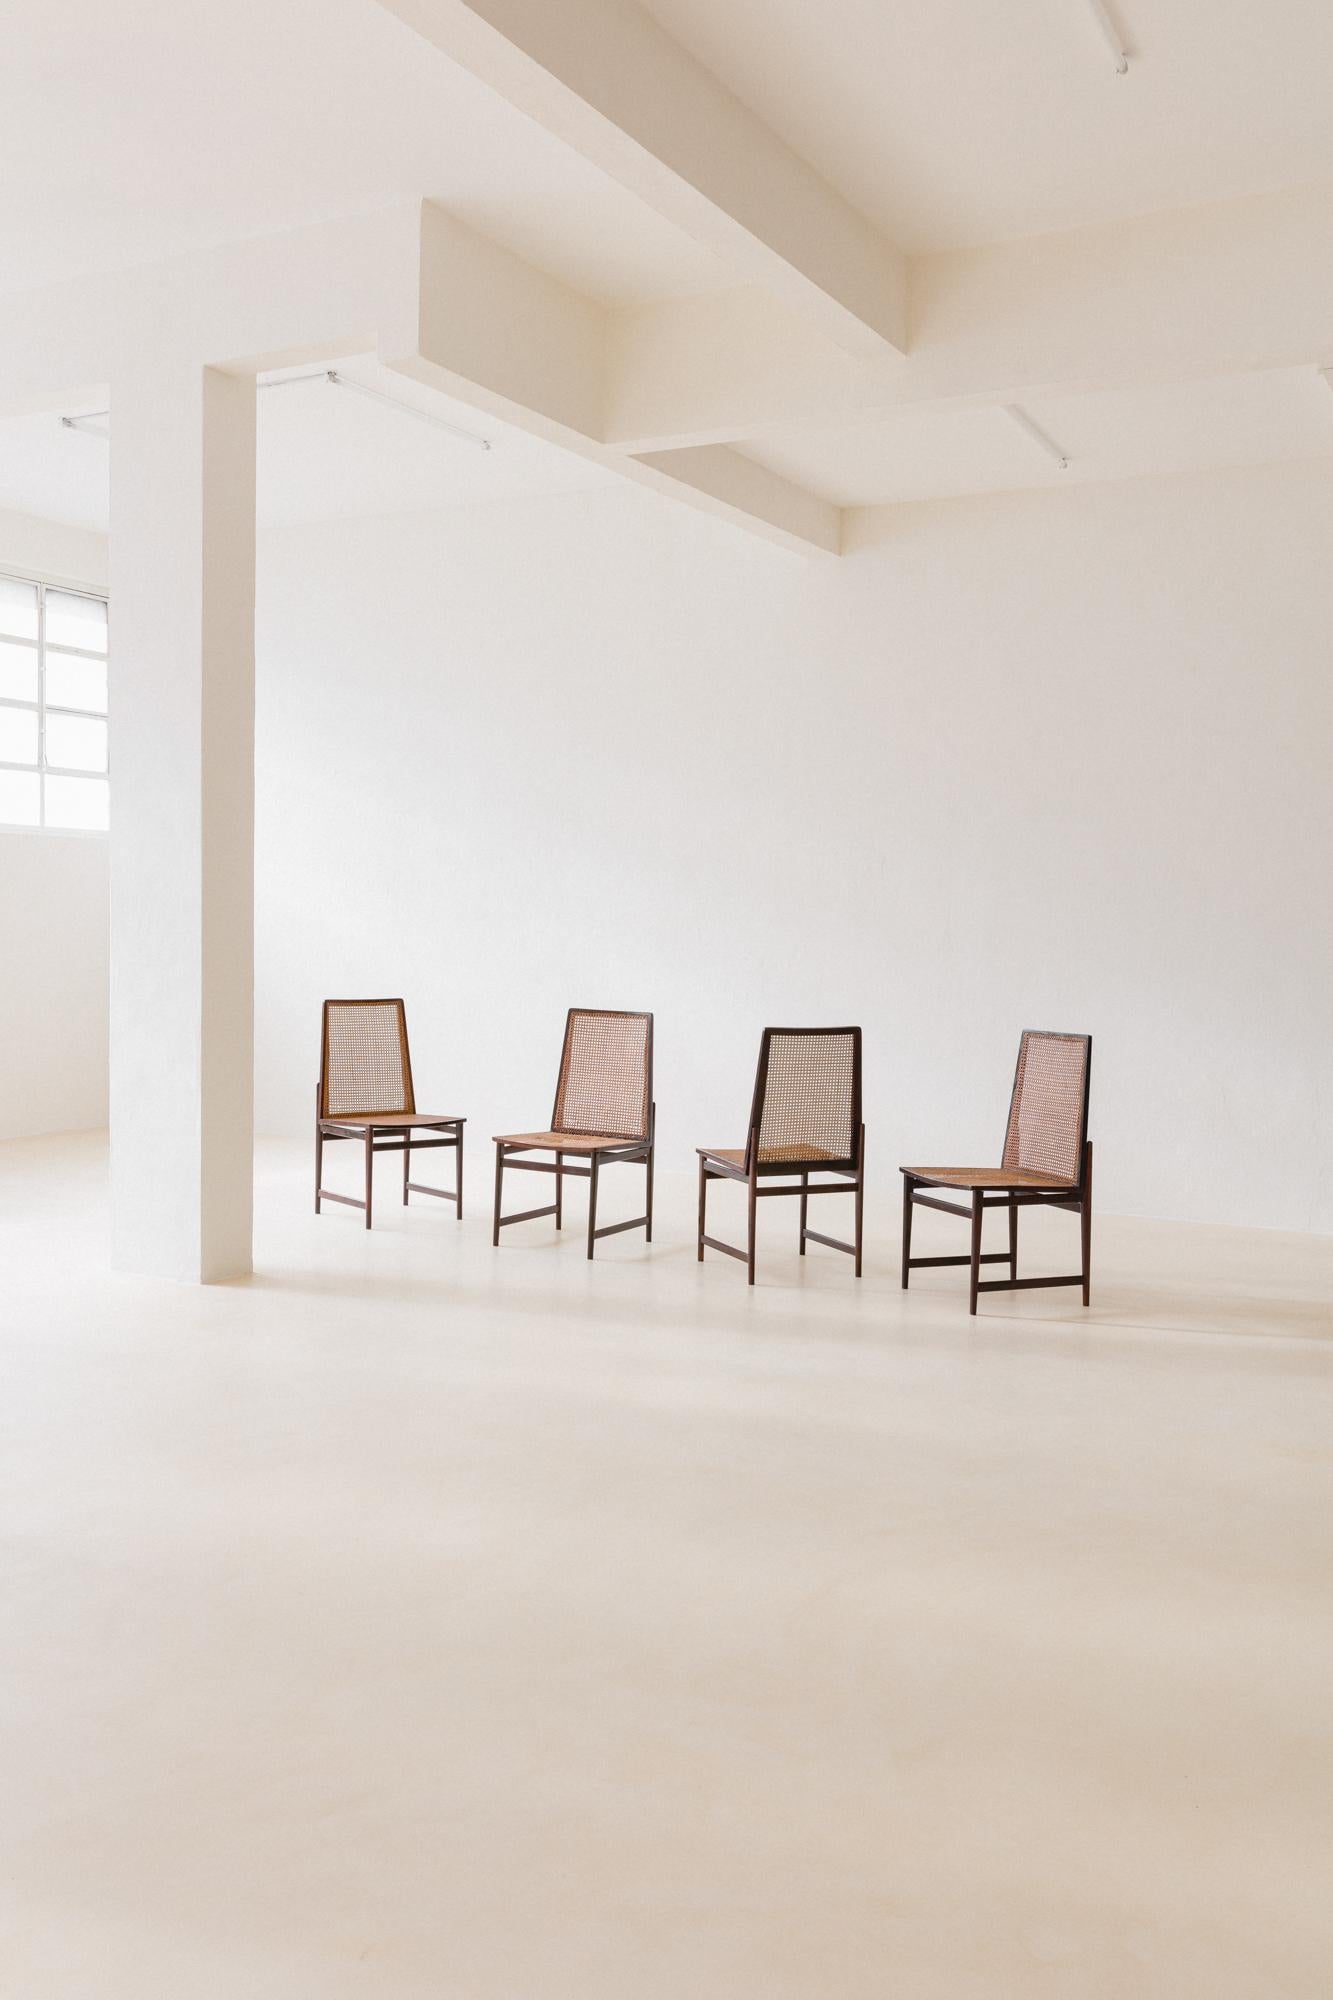 Set of 8 Rosewood and Cane Chairs by Móveis Cantù, 1960s, Brazilian Midcentury In Good Condition For Sale In New York, NY